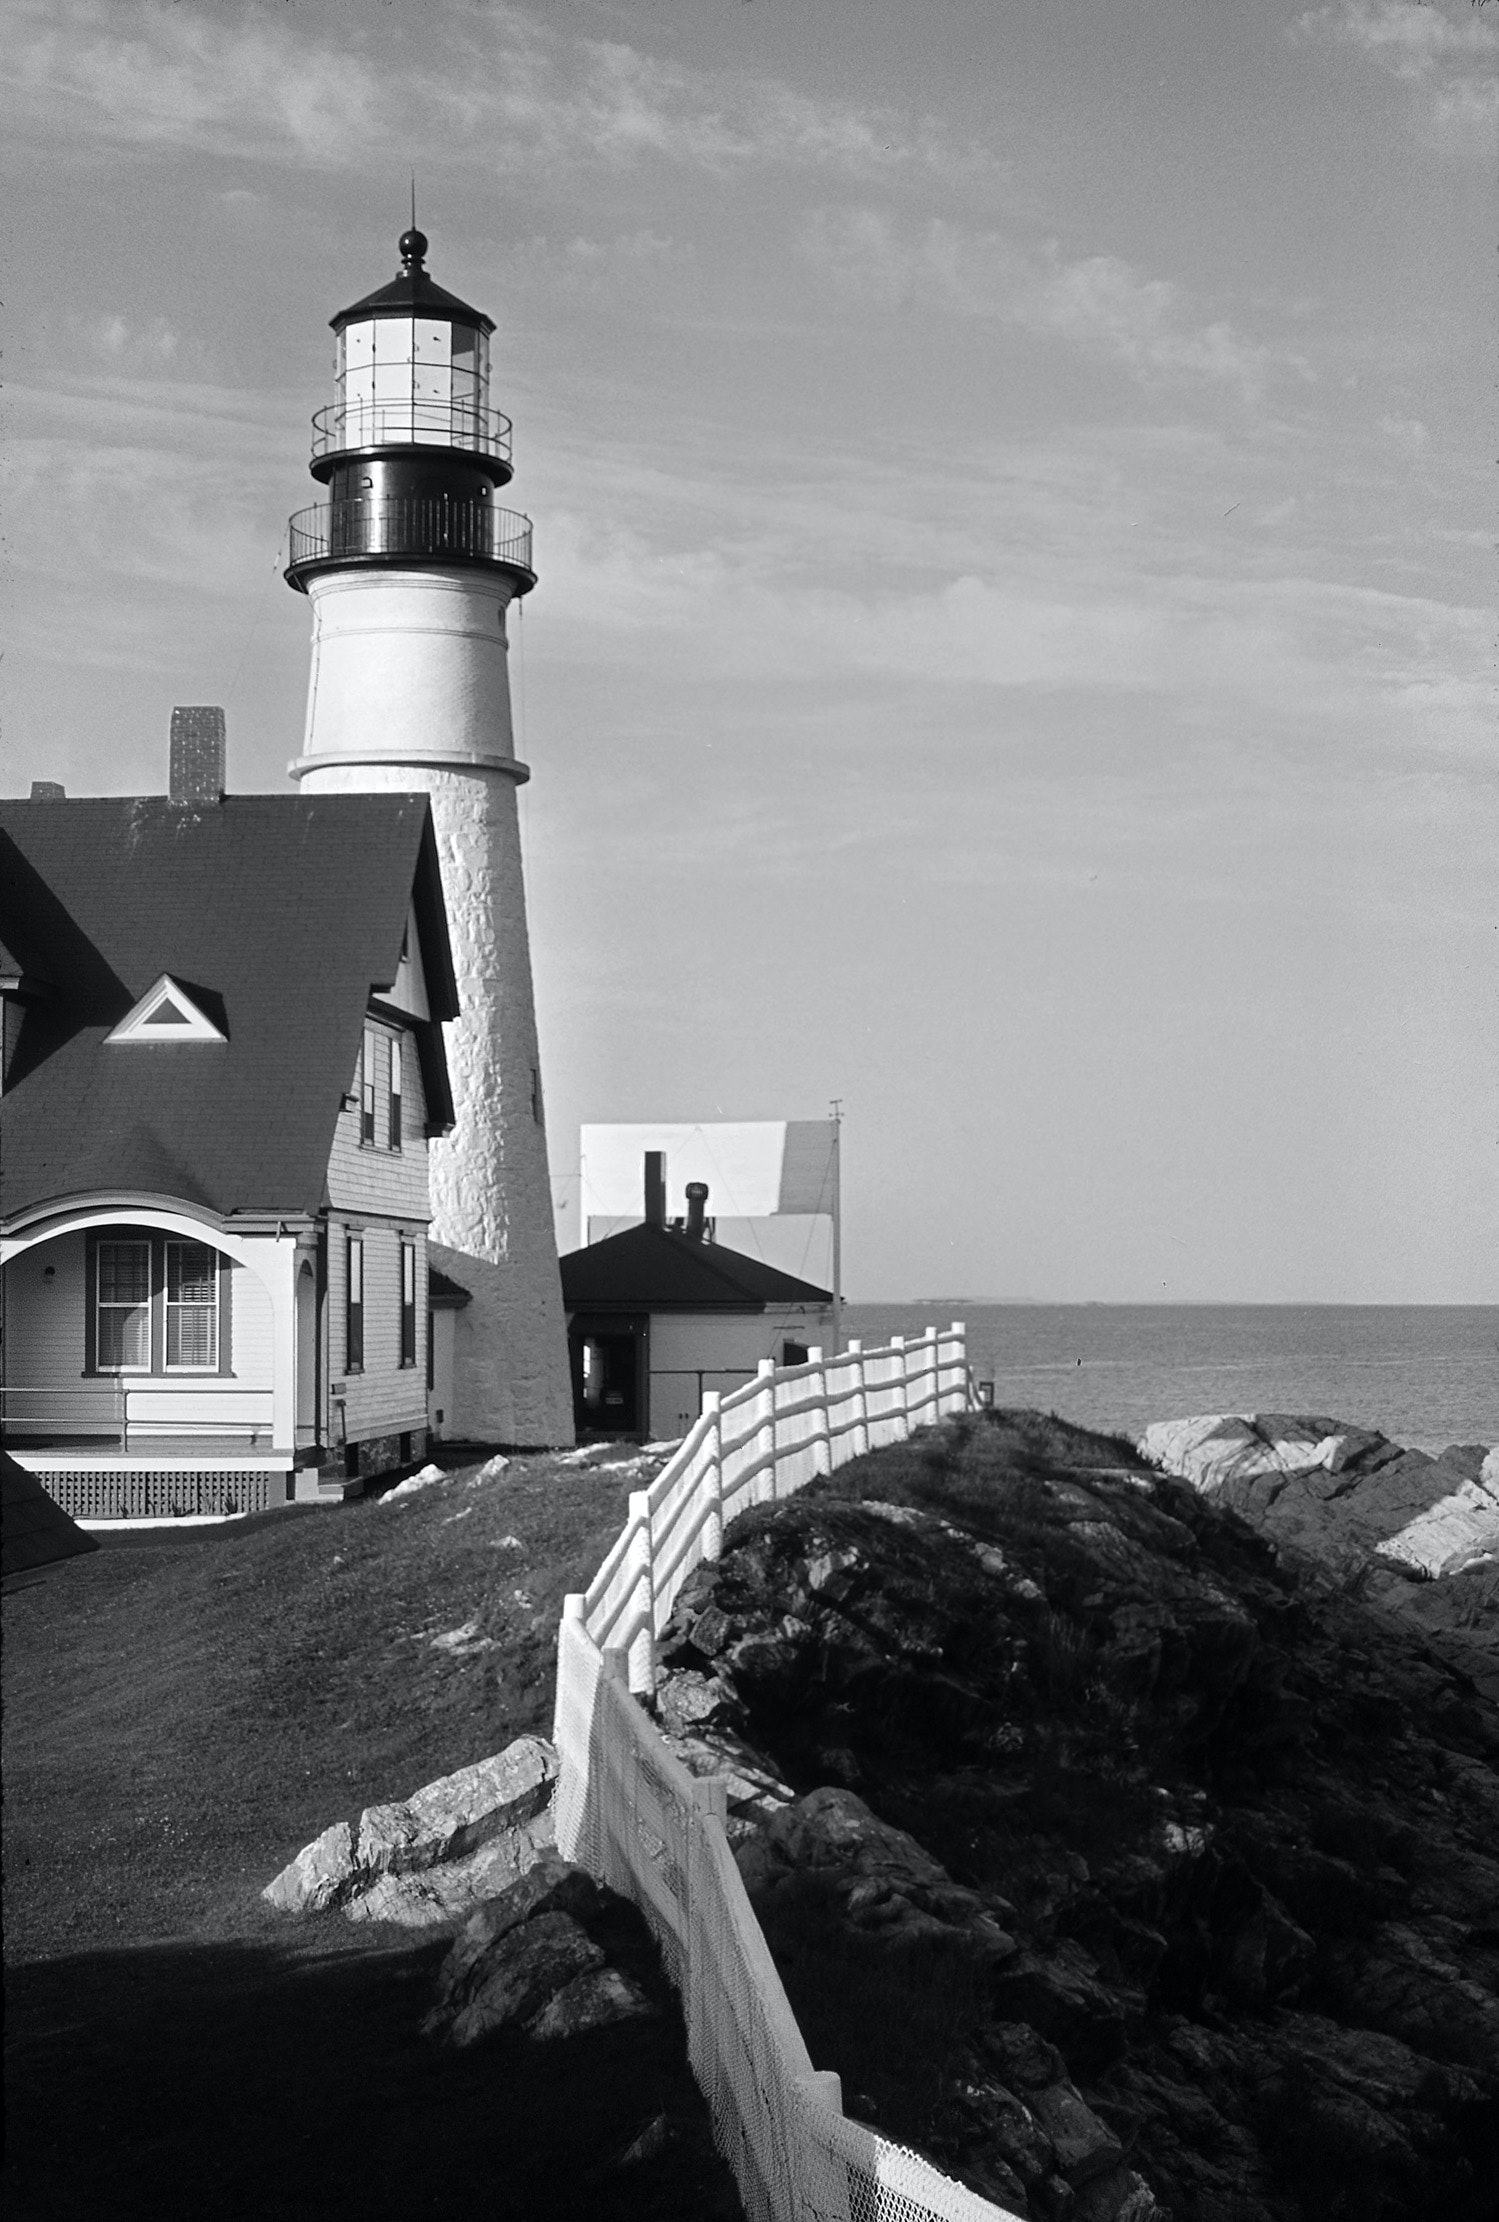 Are you looking for some of the best hotels in Maine? Take a look at this article for some help. Pictured here is a beautiful lighthouse in Maine.